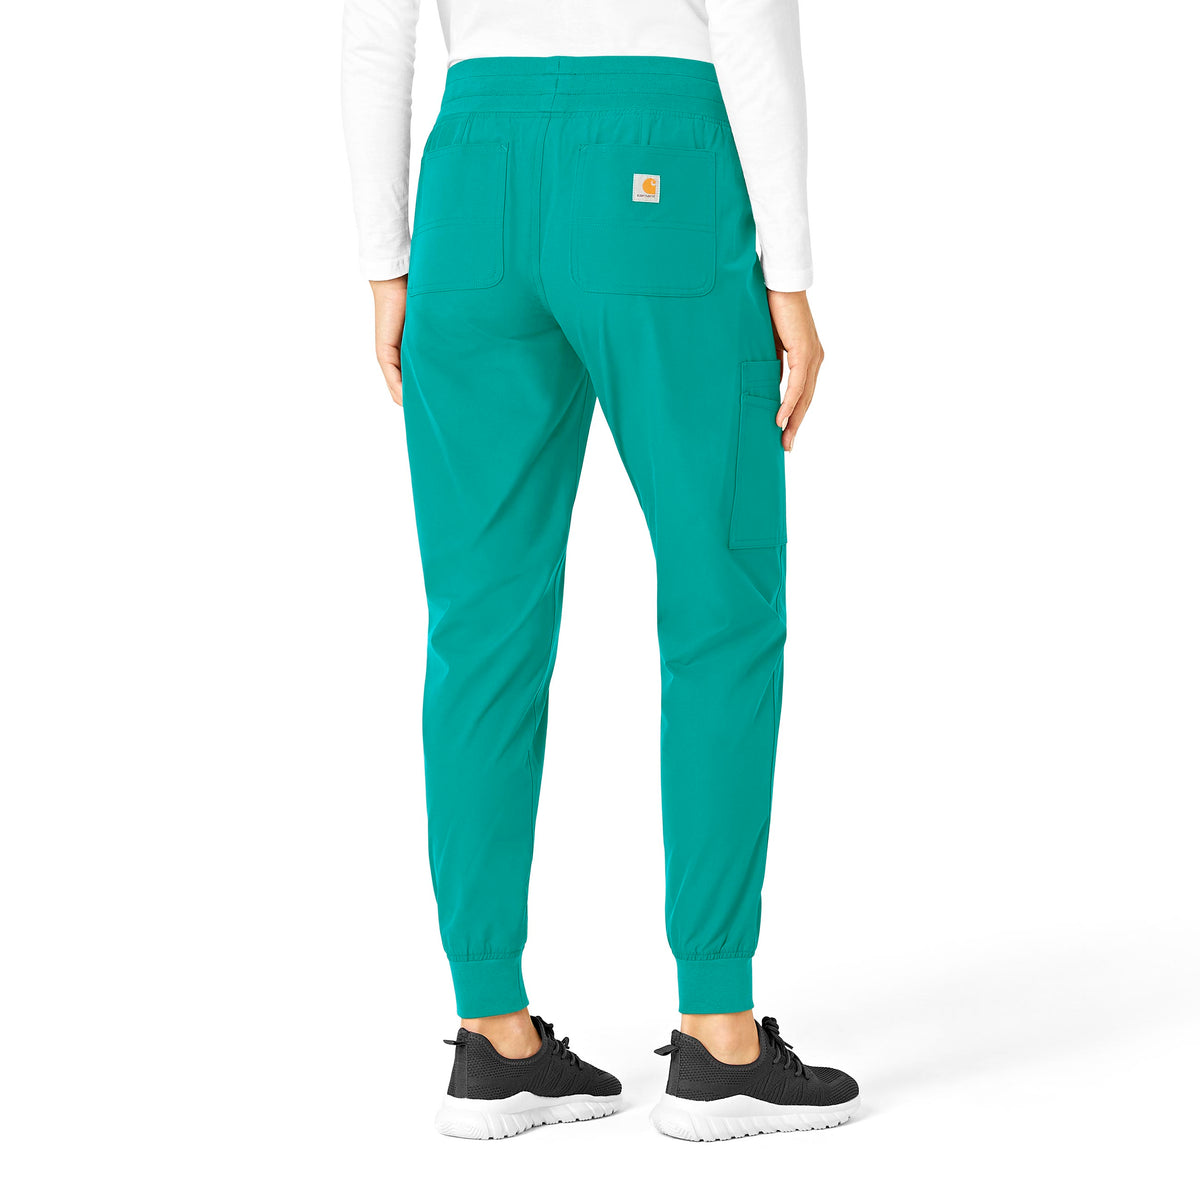 Force Essentials Women's Jogger Scrub Pant Teal Blue back view